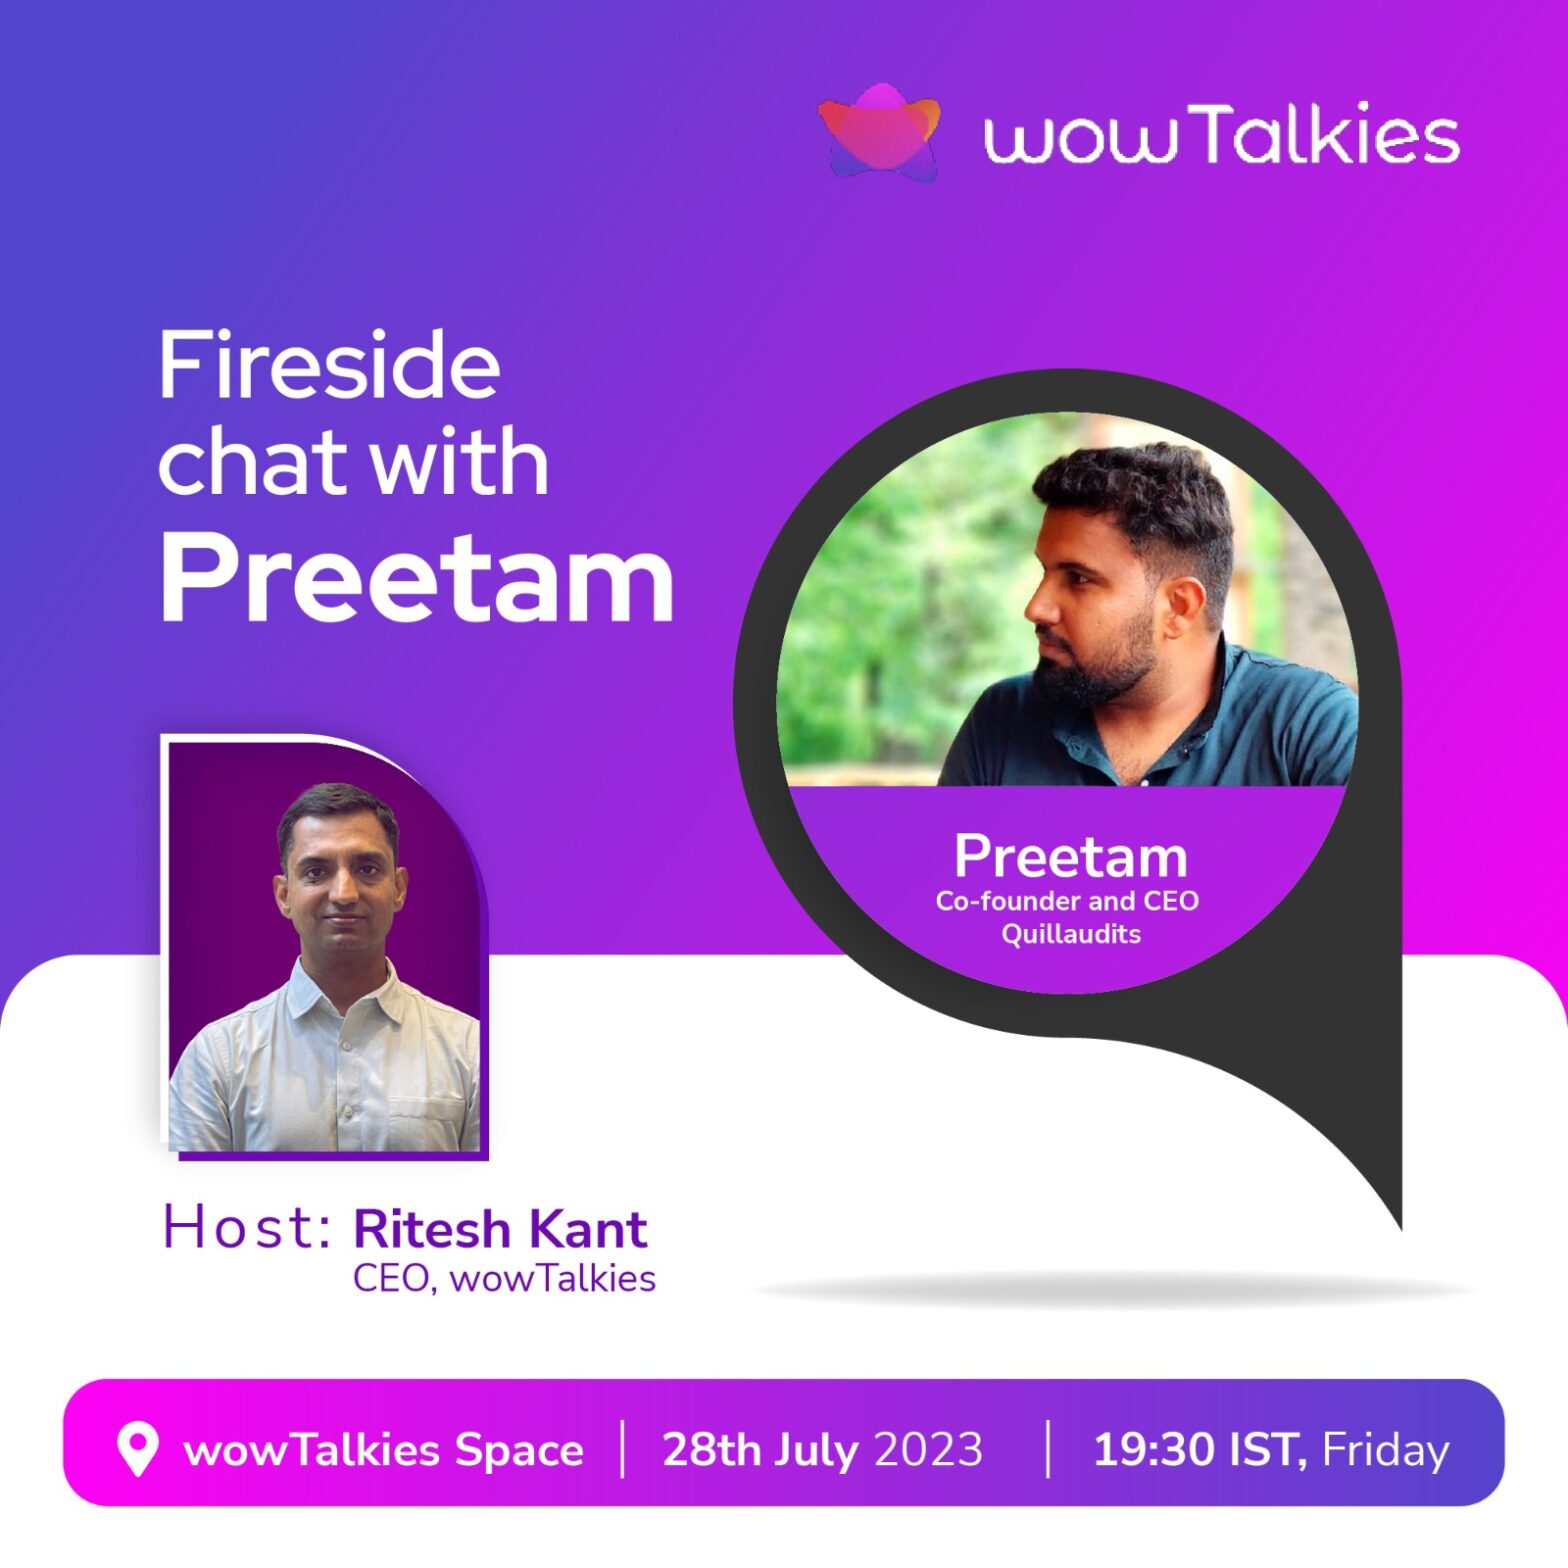 Fireside chat with Preetam